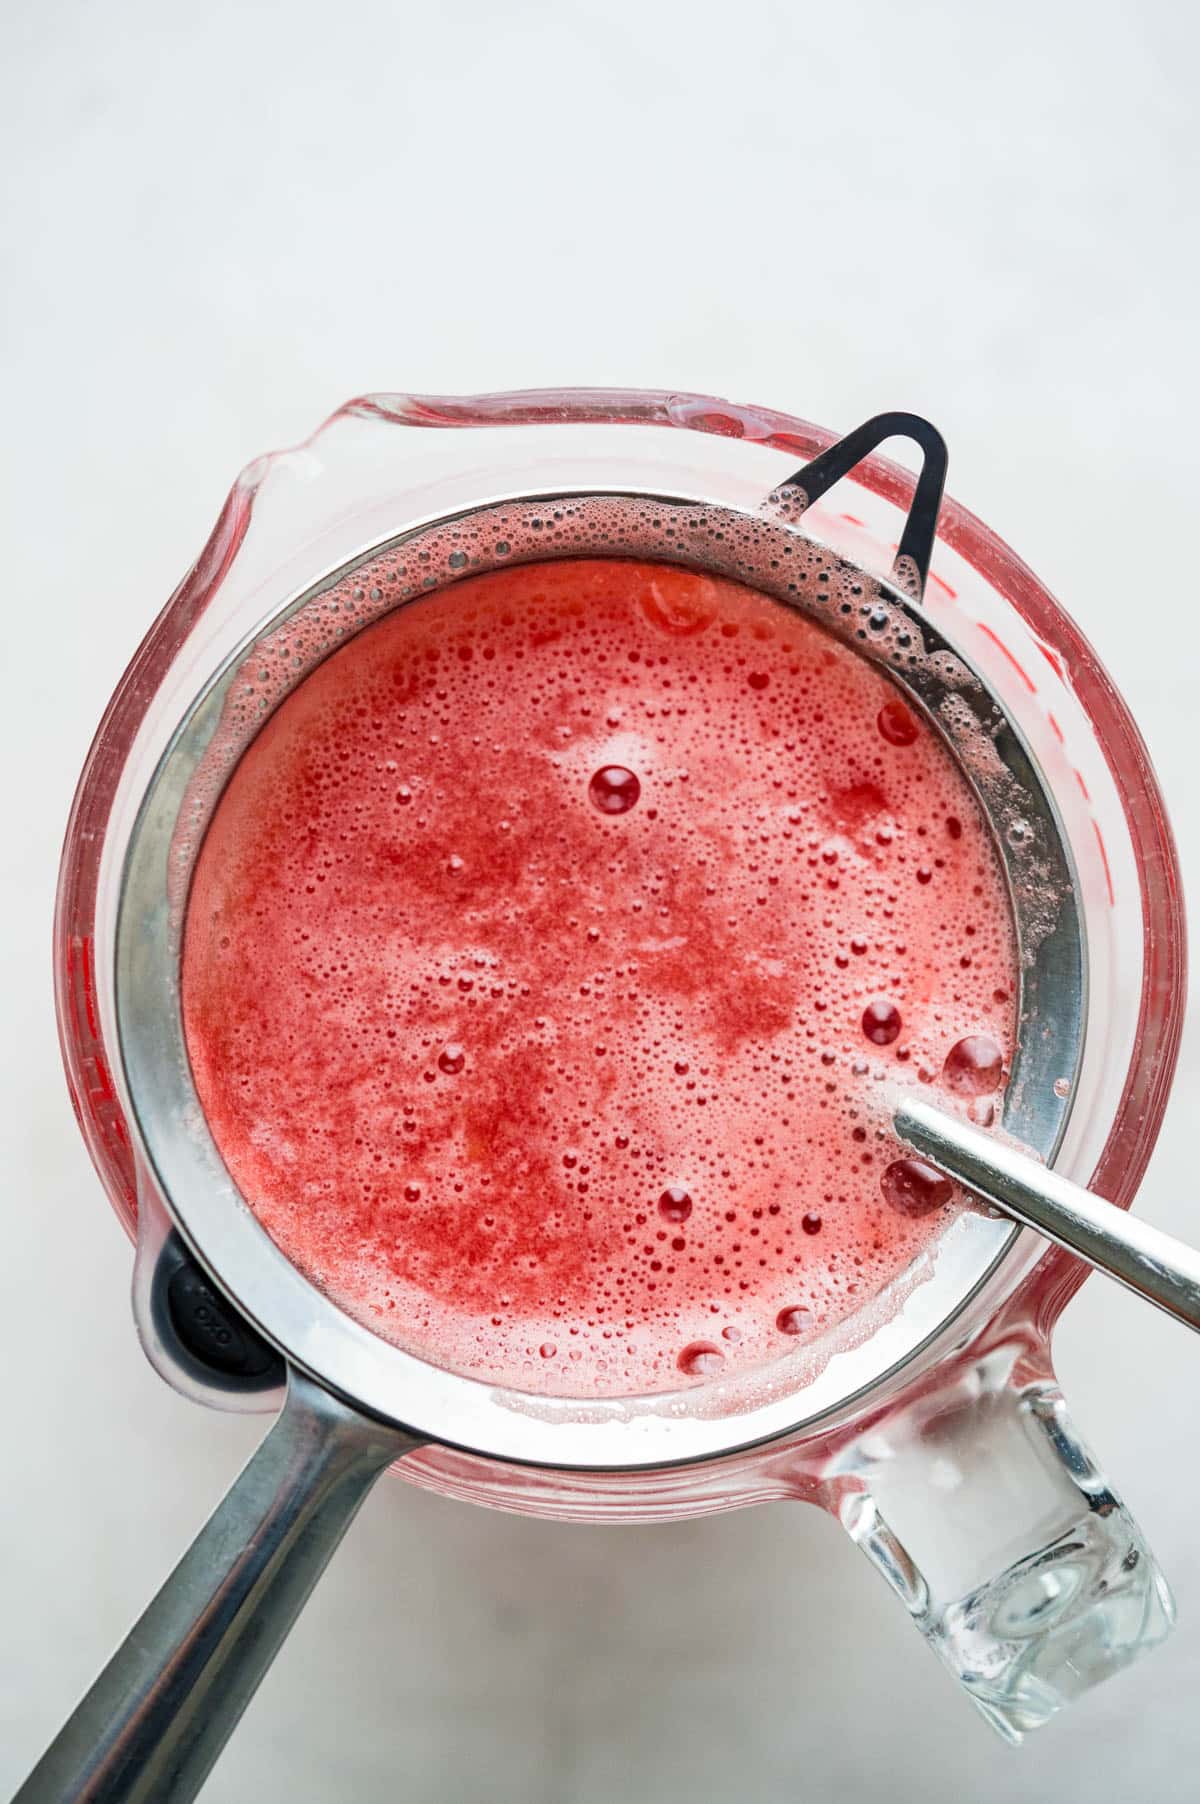 Using a spoon, stir the watermelon juice and pulp so it strains faster.